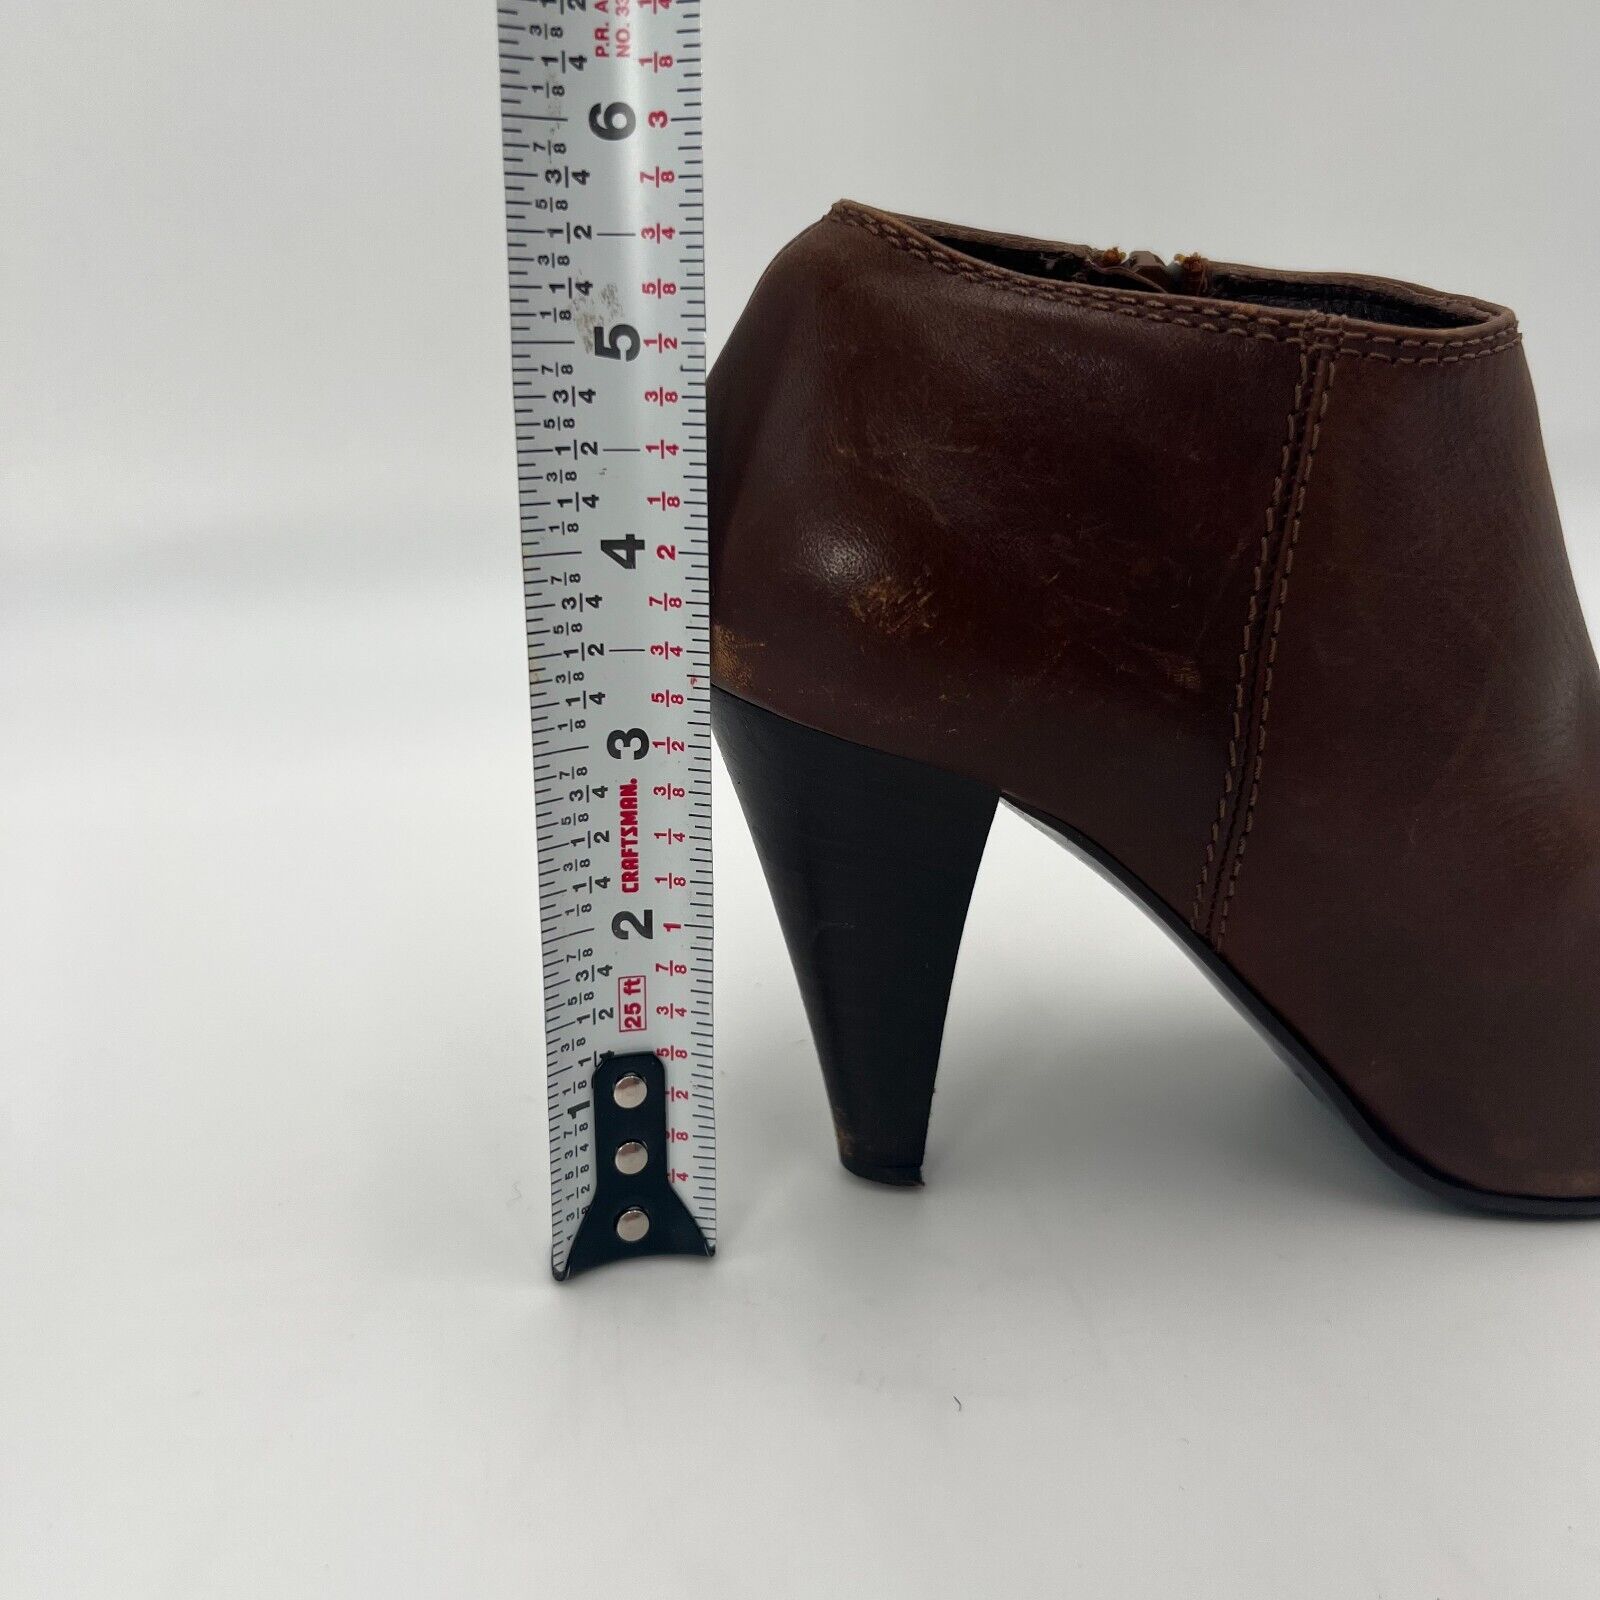 J. Crew Kingston Ankle Boot Chocolate Brown Italian Leather 3 inch Heel Size 6.5